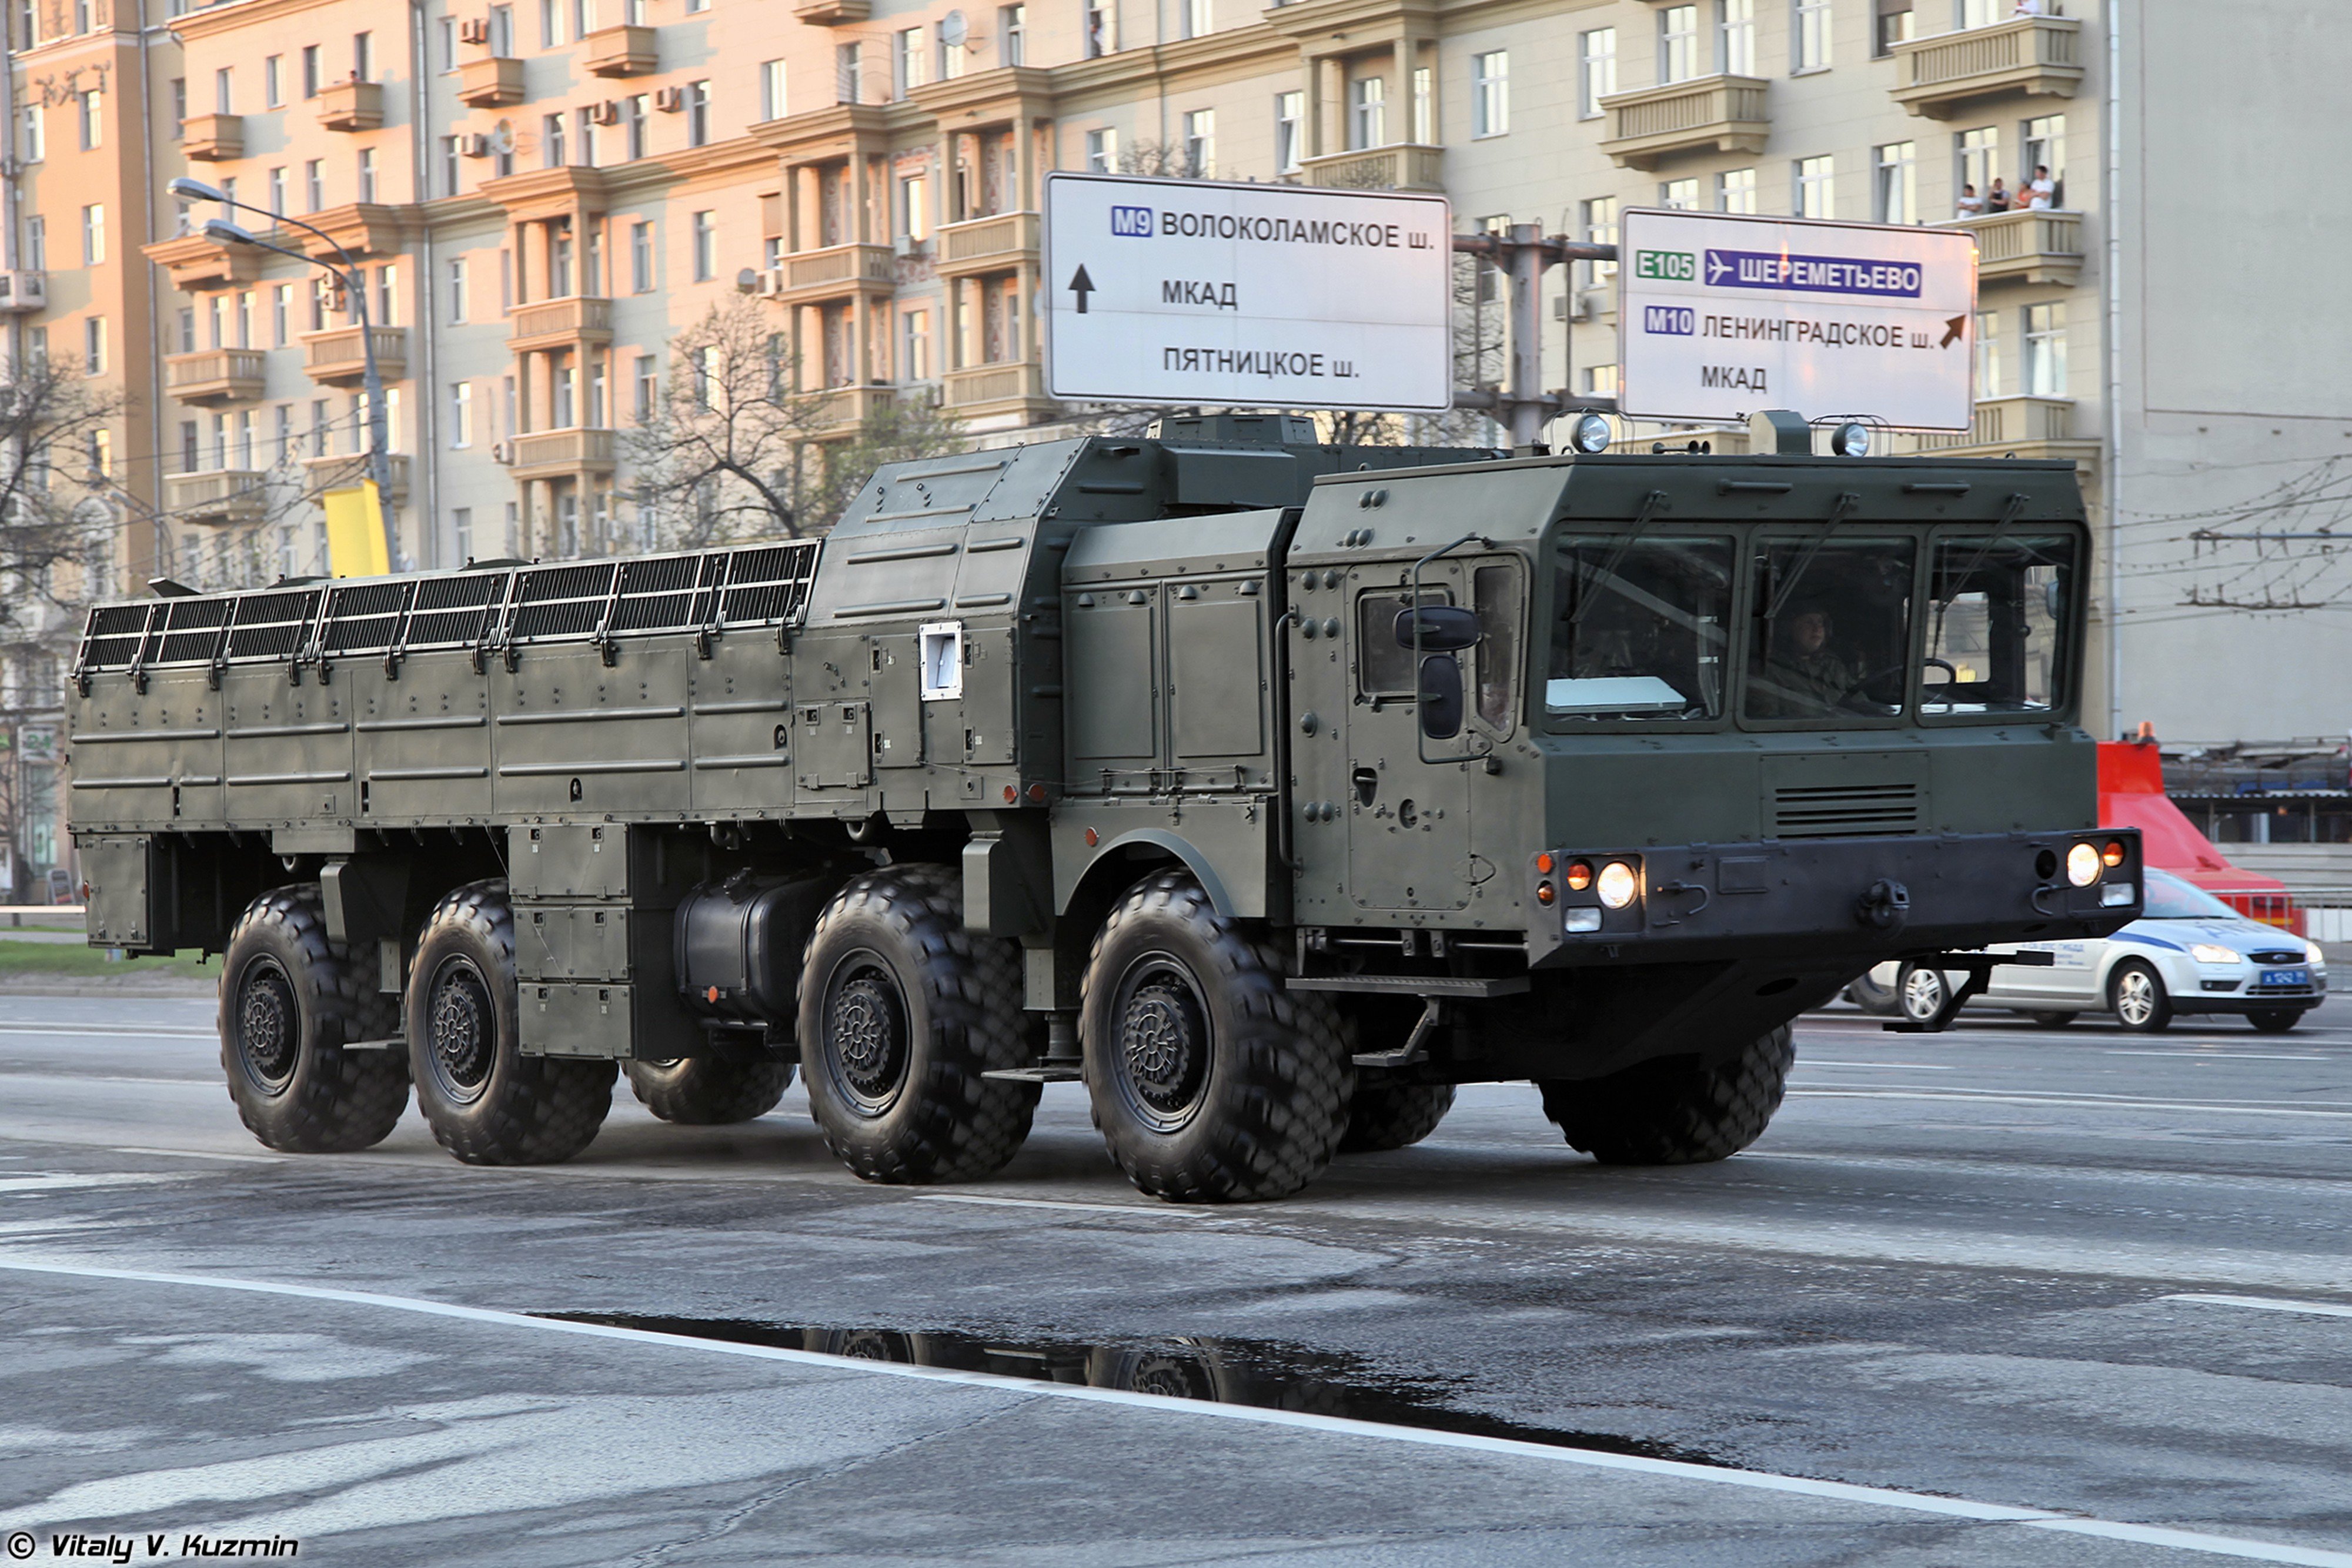 Wallpaper, 29th, 4000x2667 px, 9t April, army, day, for, in, Iskander, loading, M, military, Moscow, of, parade, red, rehearsal, Russia, Russian, star, system, vehicle, Victory 4000x2667